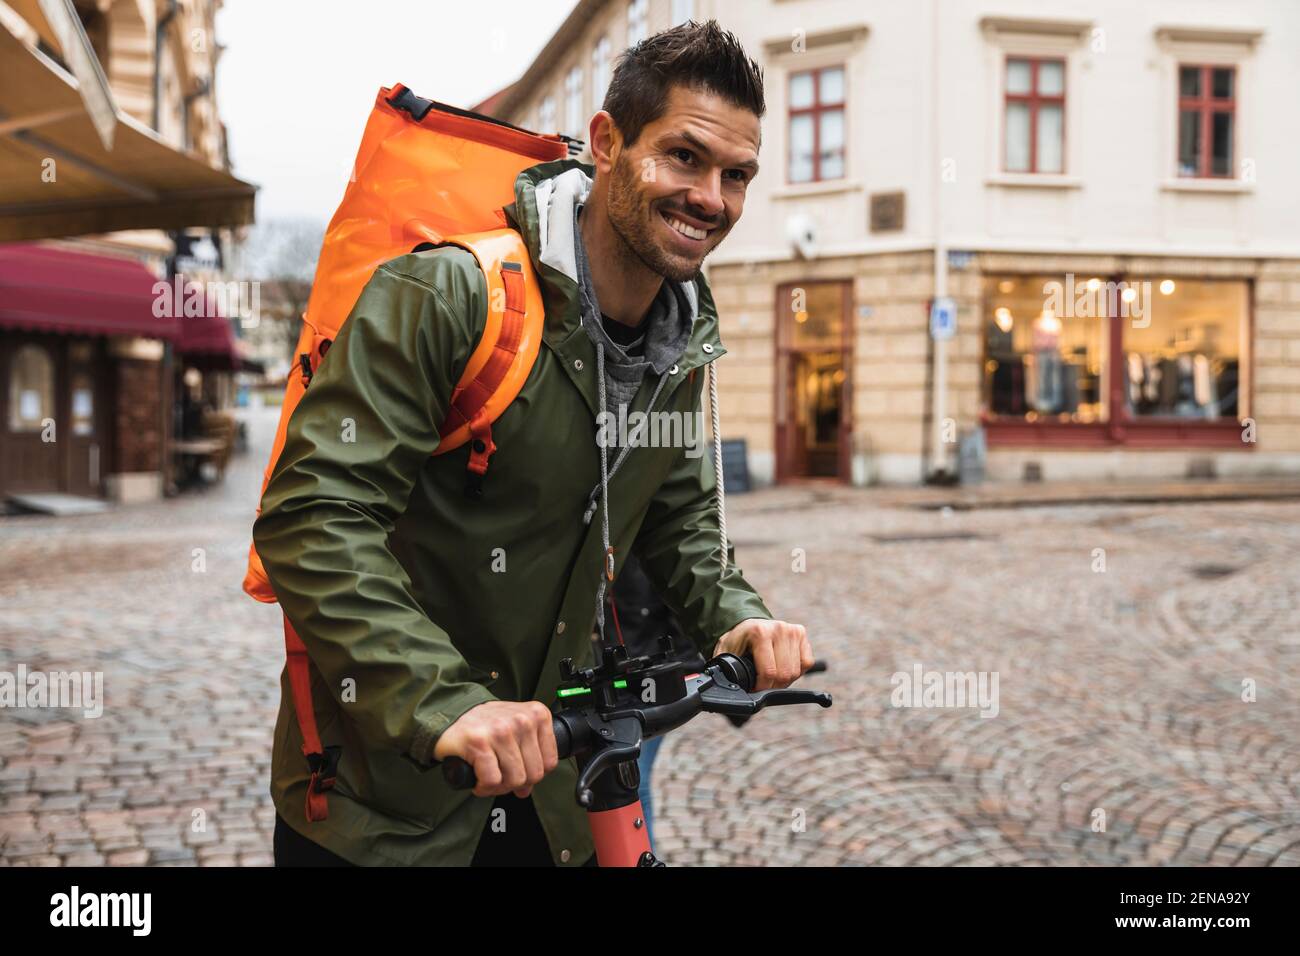 Smiling man with electric push scooter on street in city Stock Photo